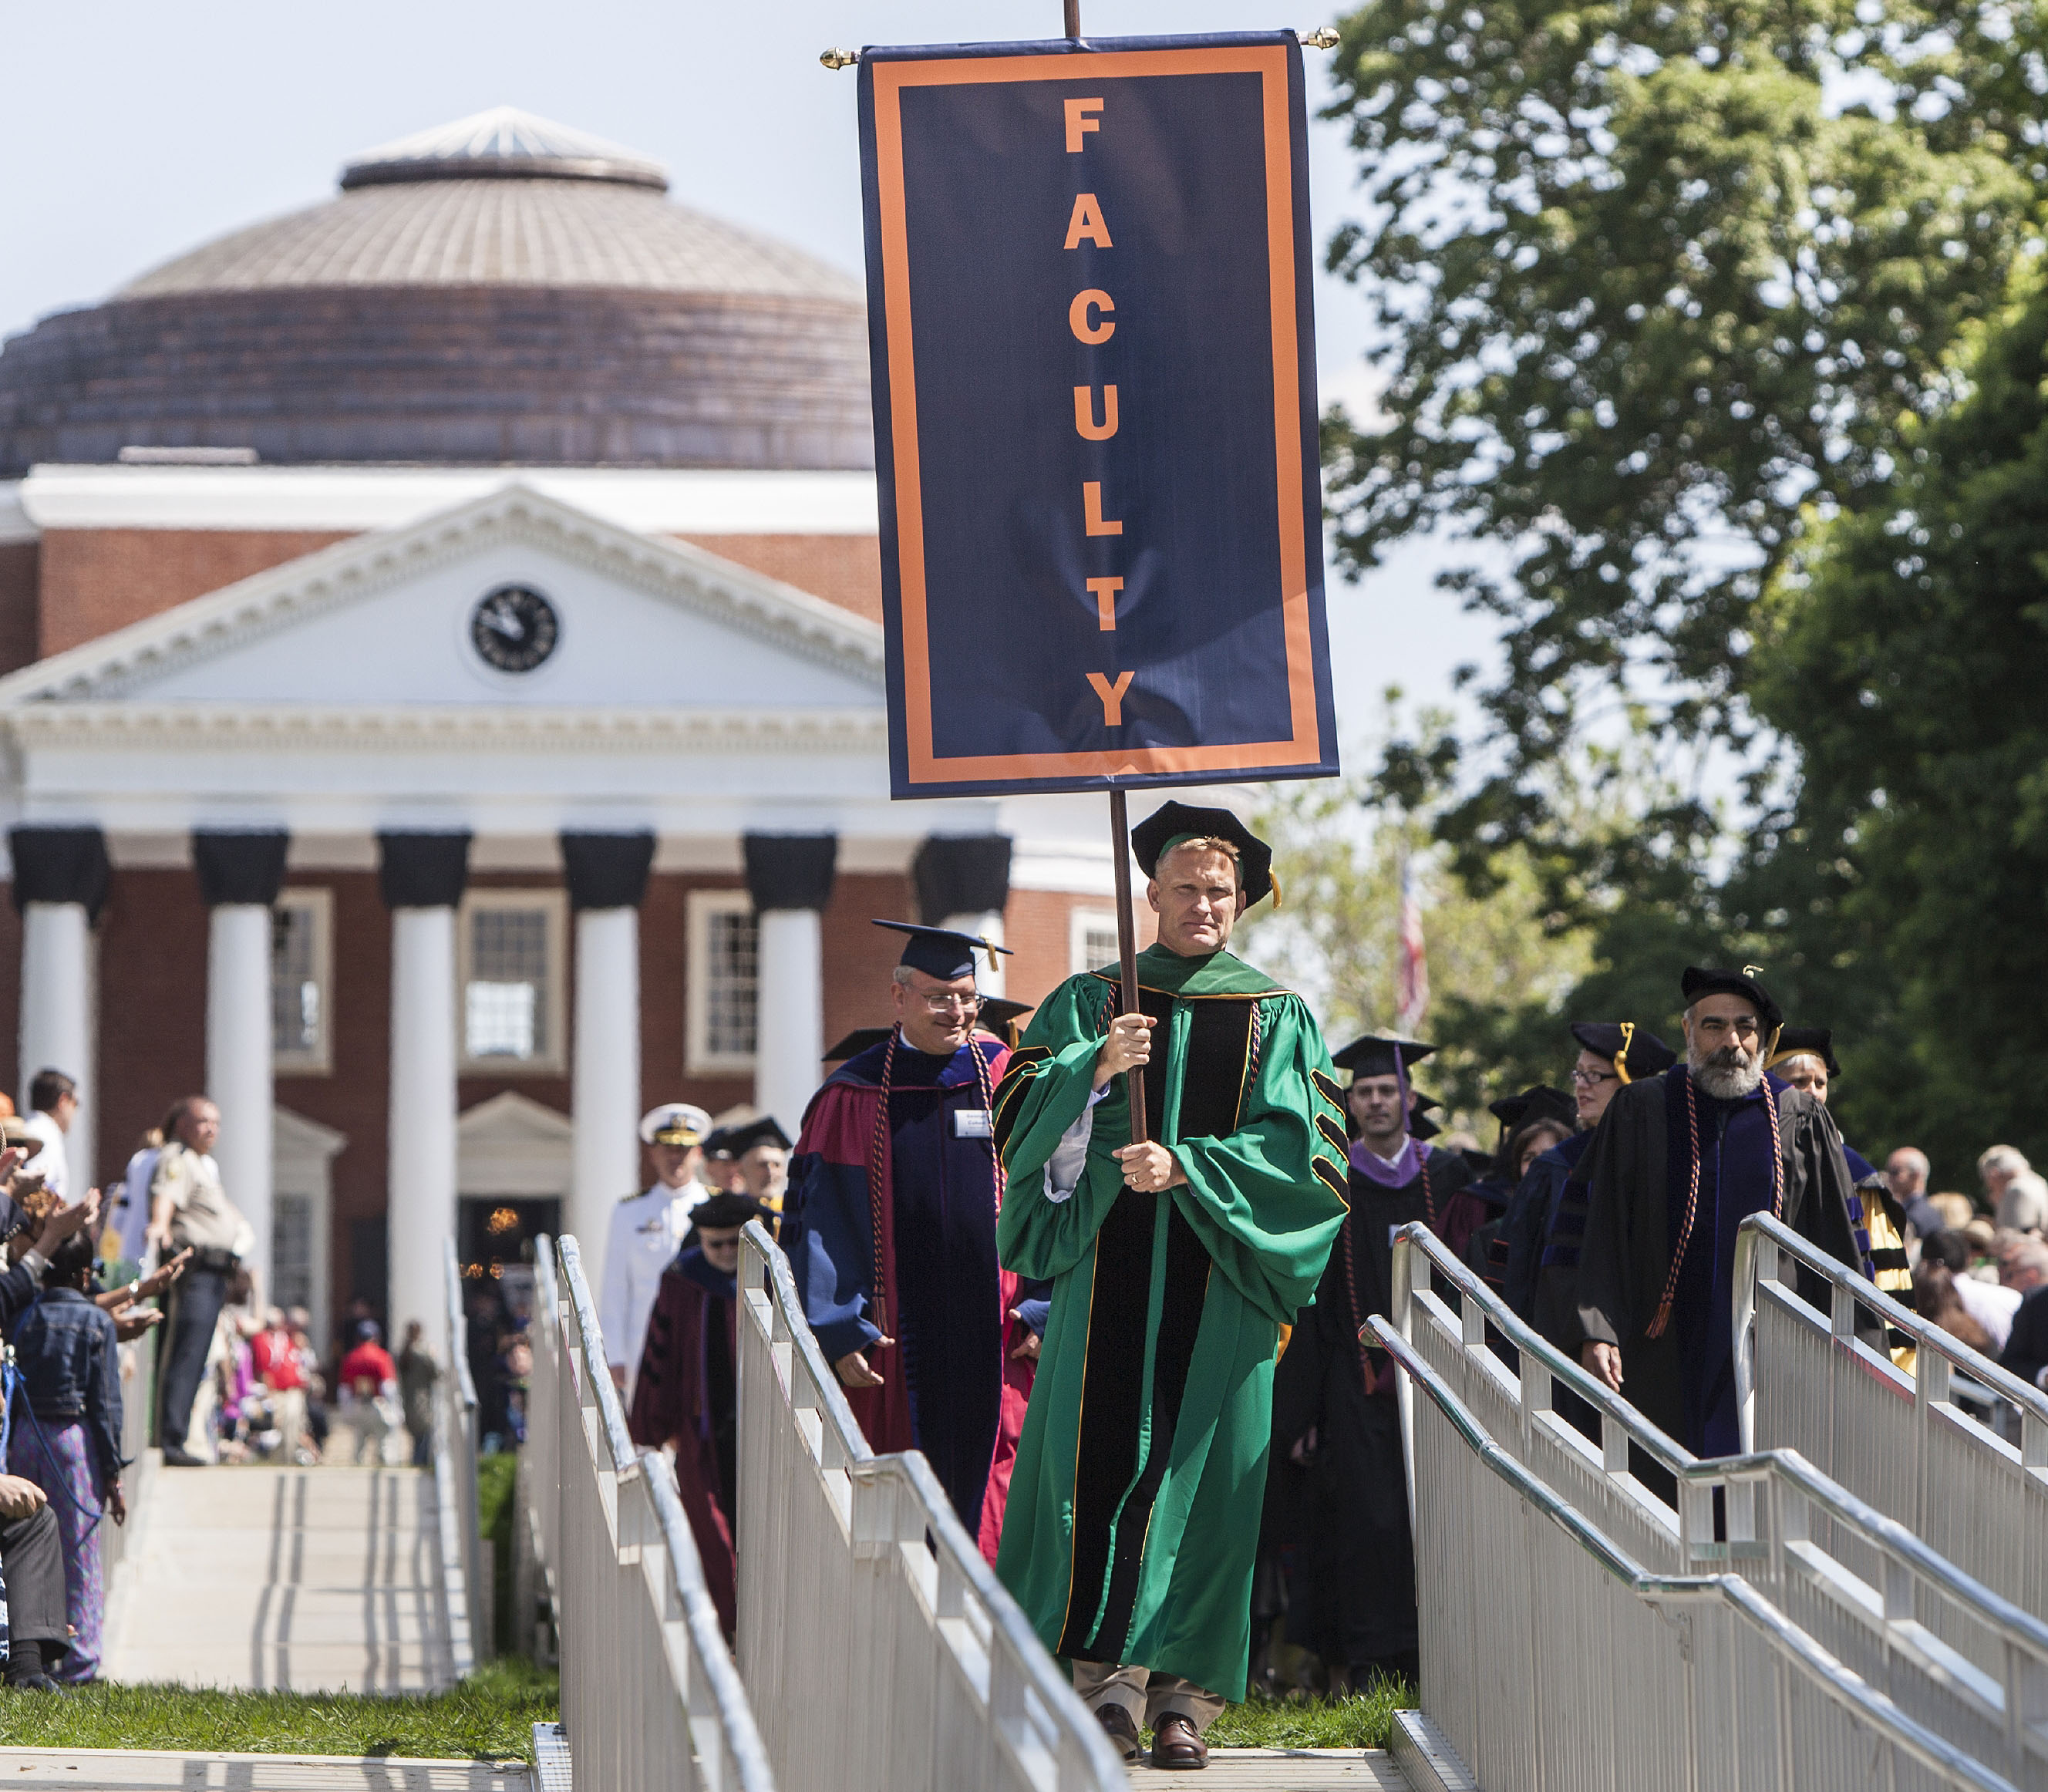 UVA Faculty process down the lawn for graduation